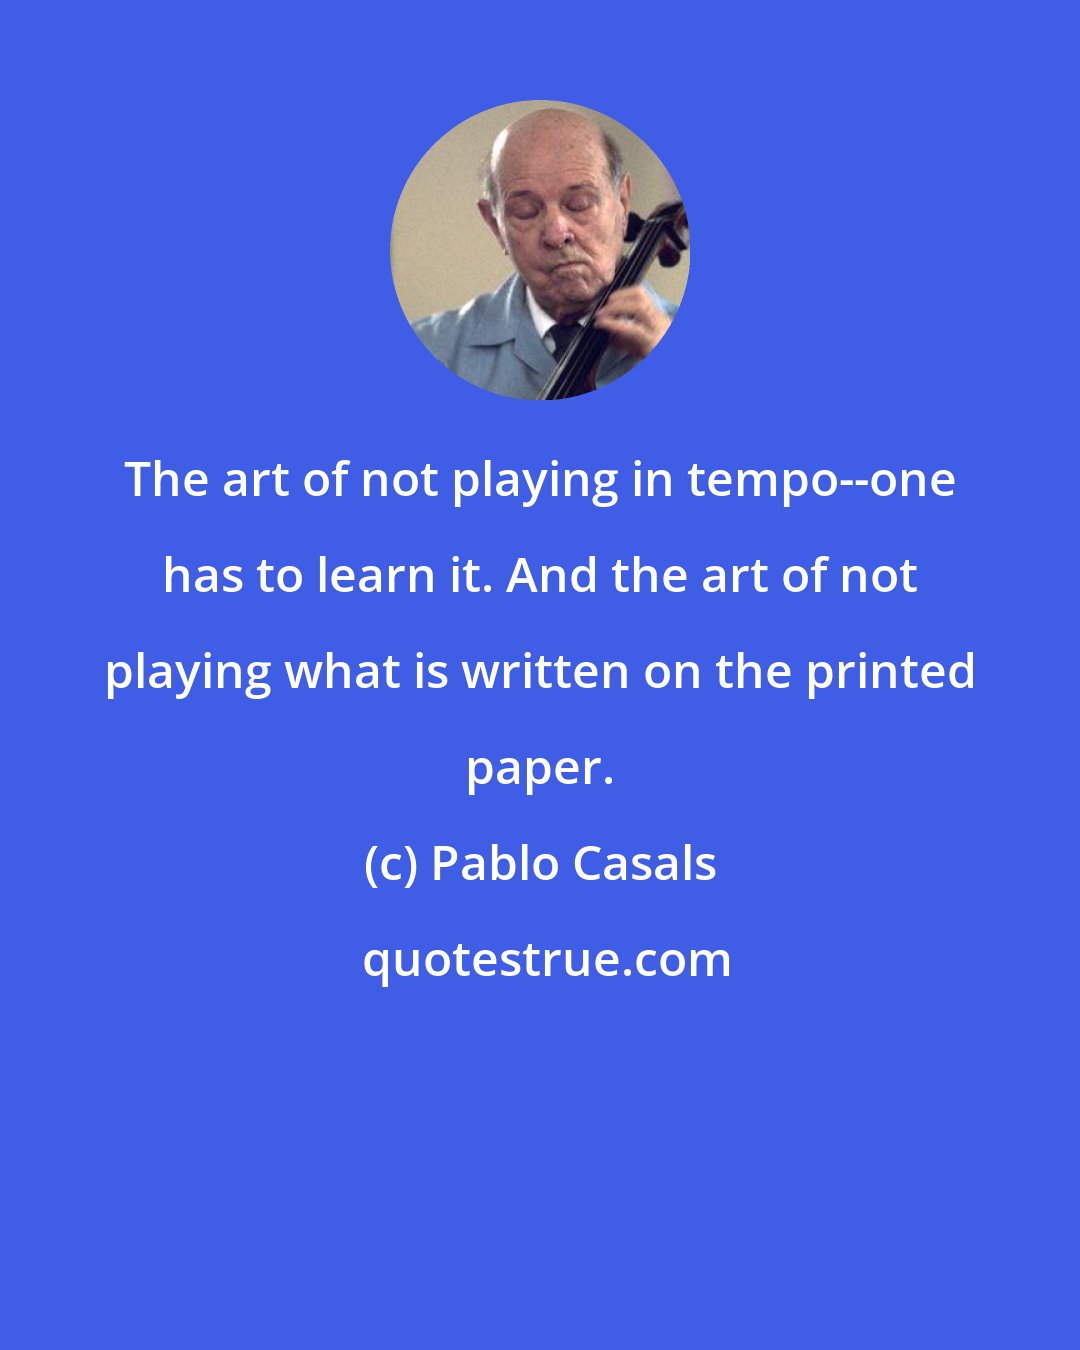 Pablo Casals: The art of not playing in tempo--one has to learn it. And the art of not playing what is written on the printed paper.